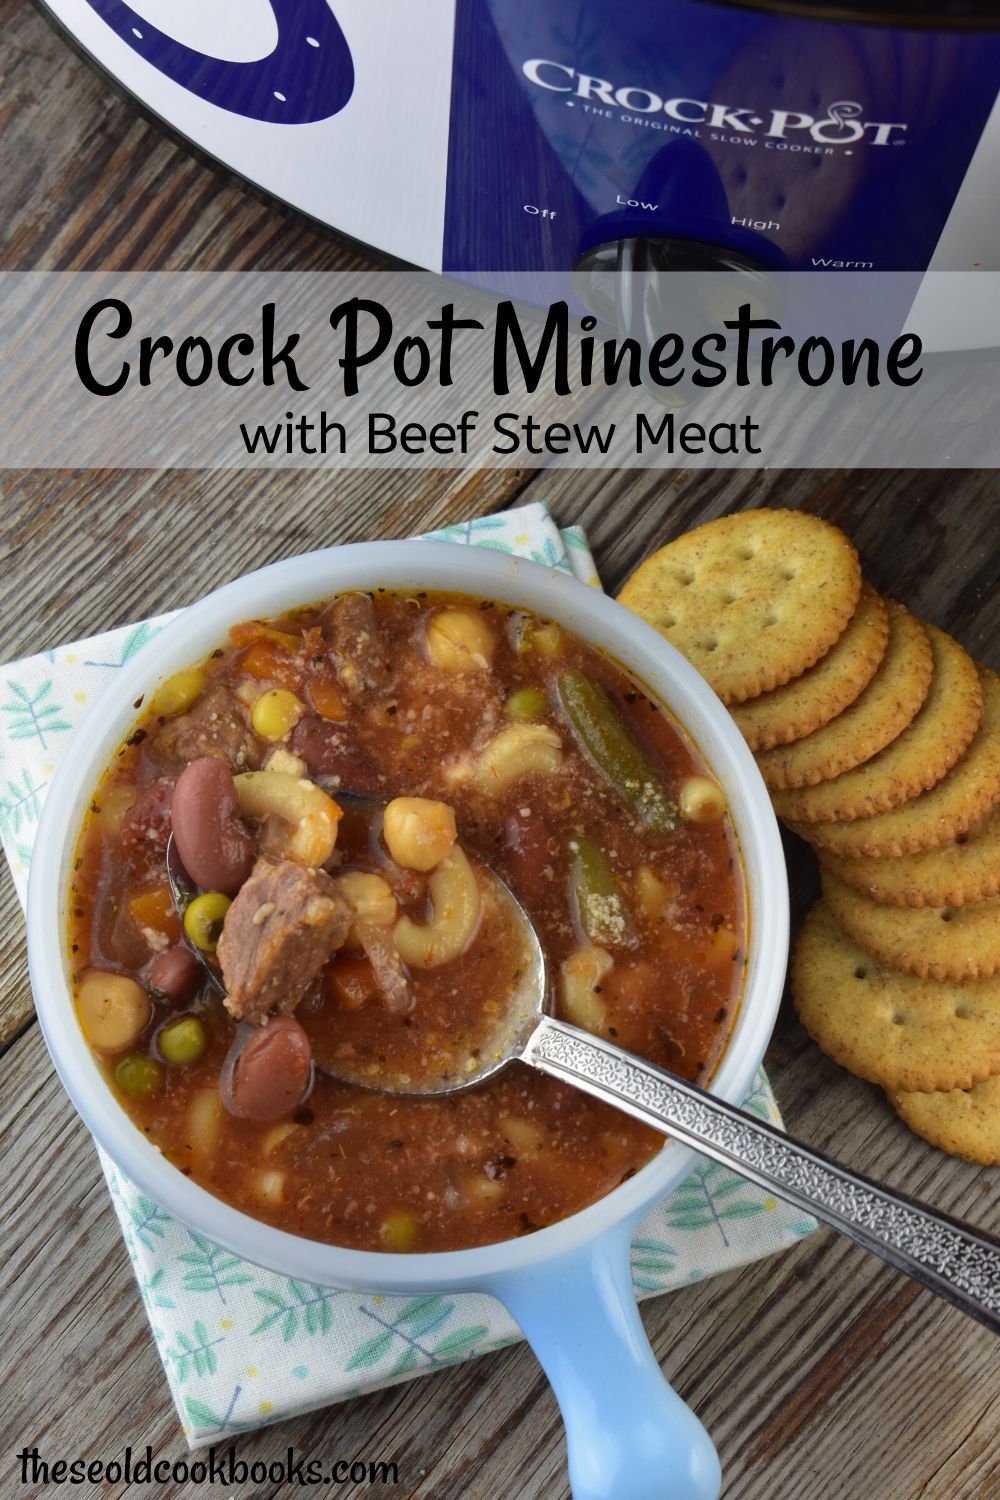 Crock Pot Minestrone with Cubed Beef is a one-pot meal that feeds a crowd. This Italian-inspired soup recipe uses beef stew meat for a hearty minestrone packed with vegetables and beans. 